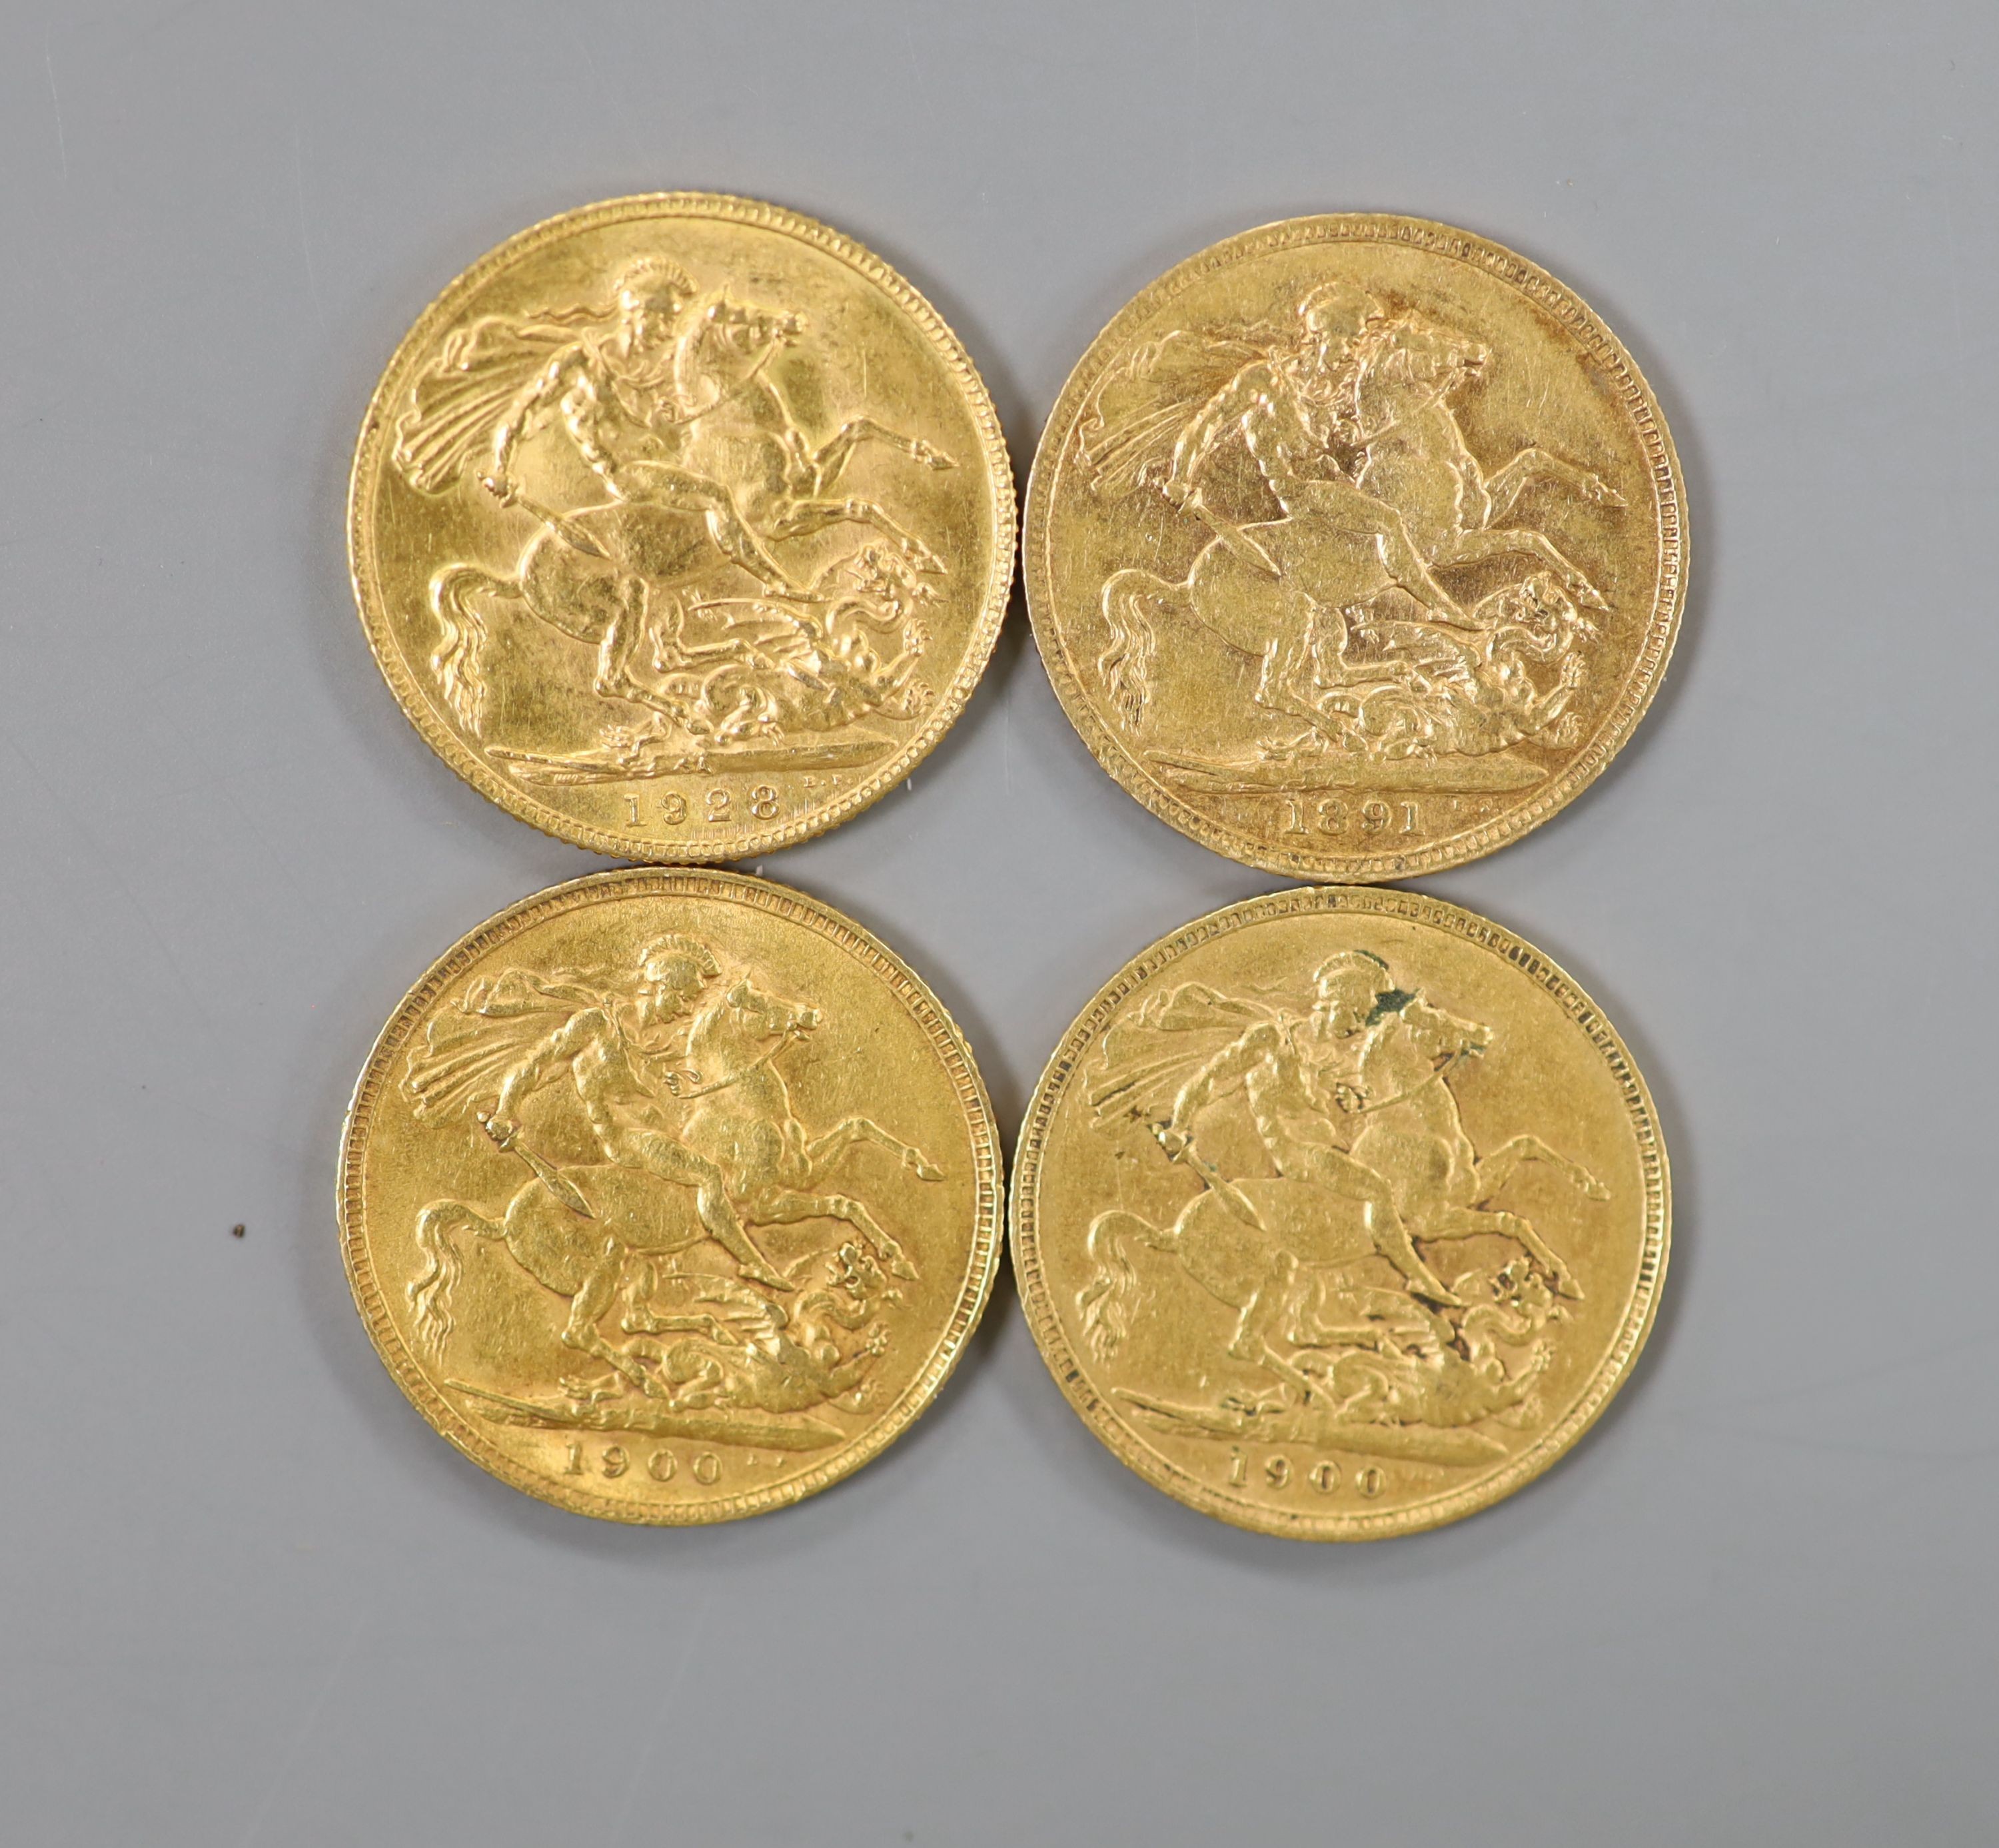 Four gold sovereigns, 1991,1900(2) and 1928.